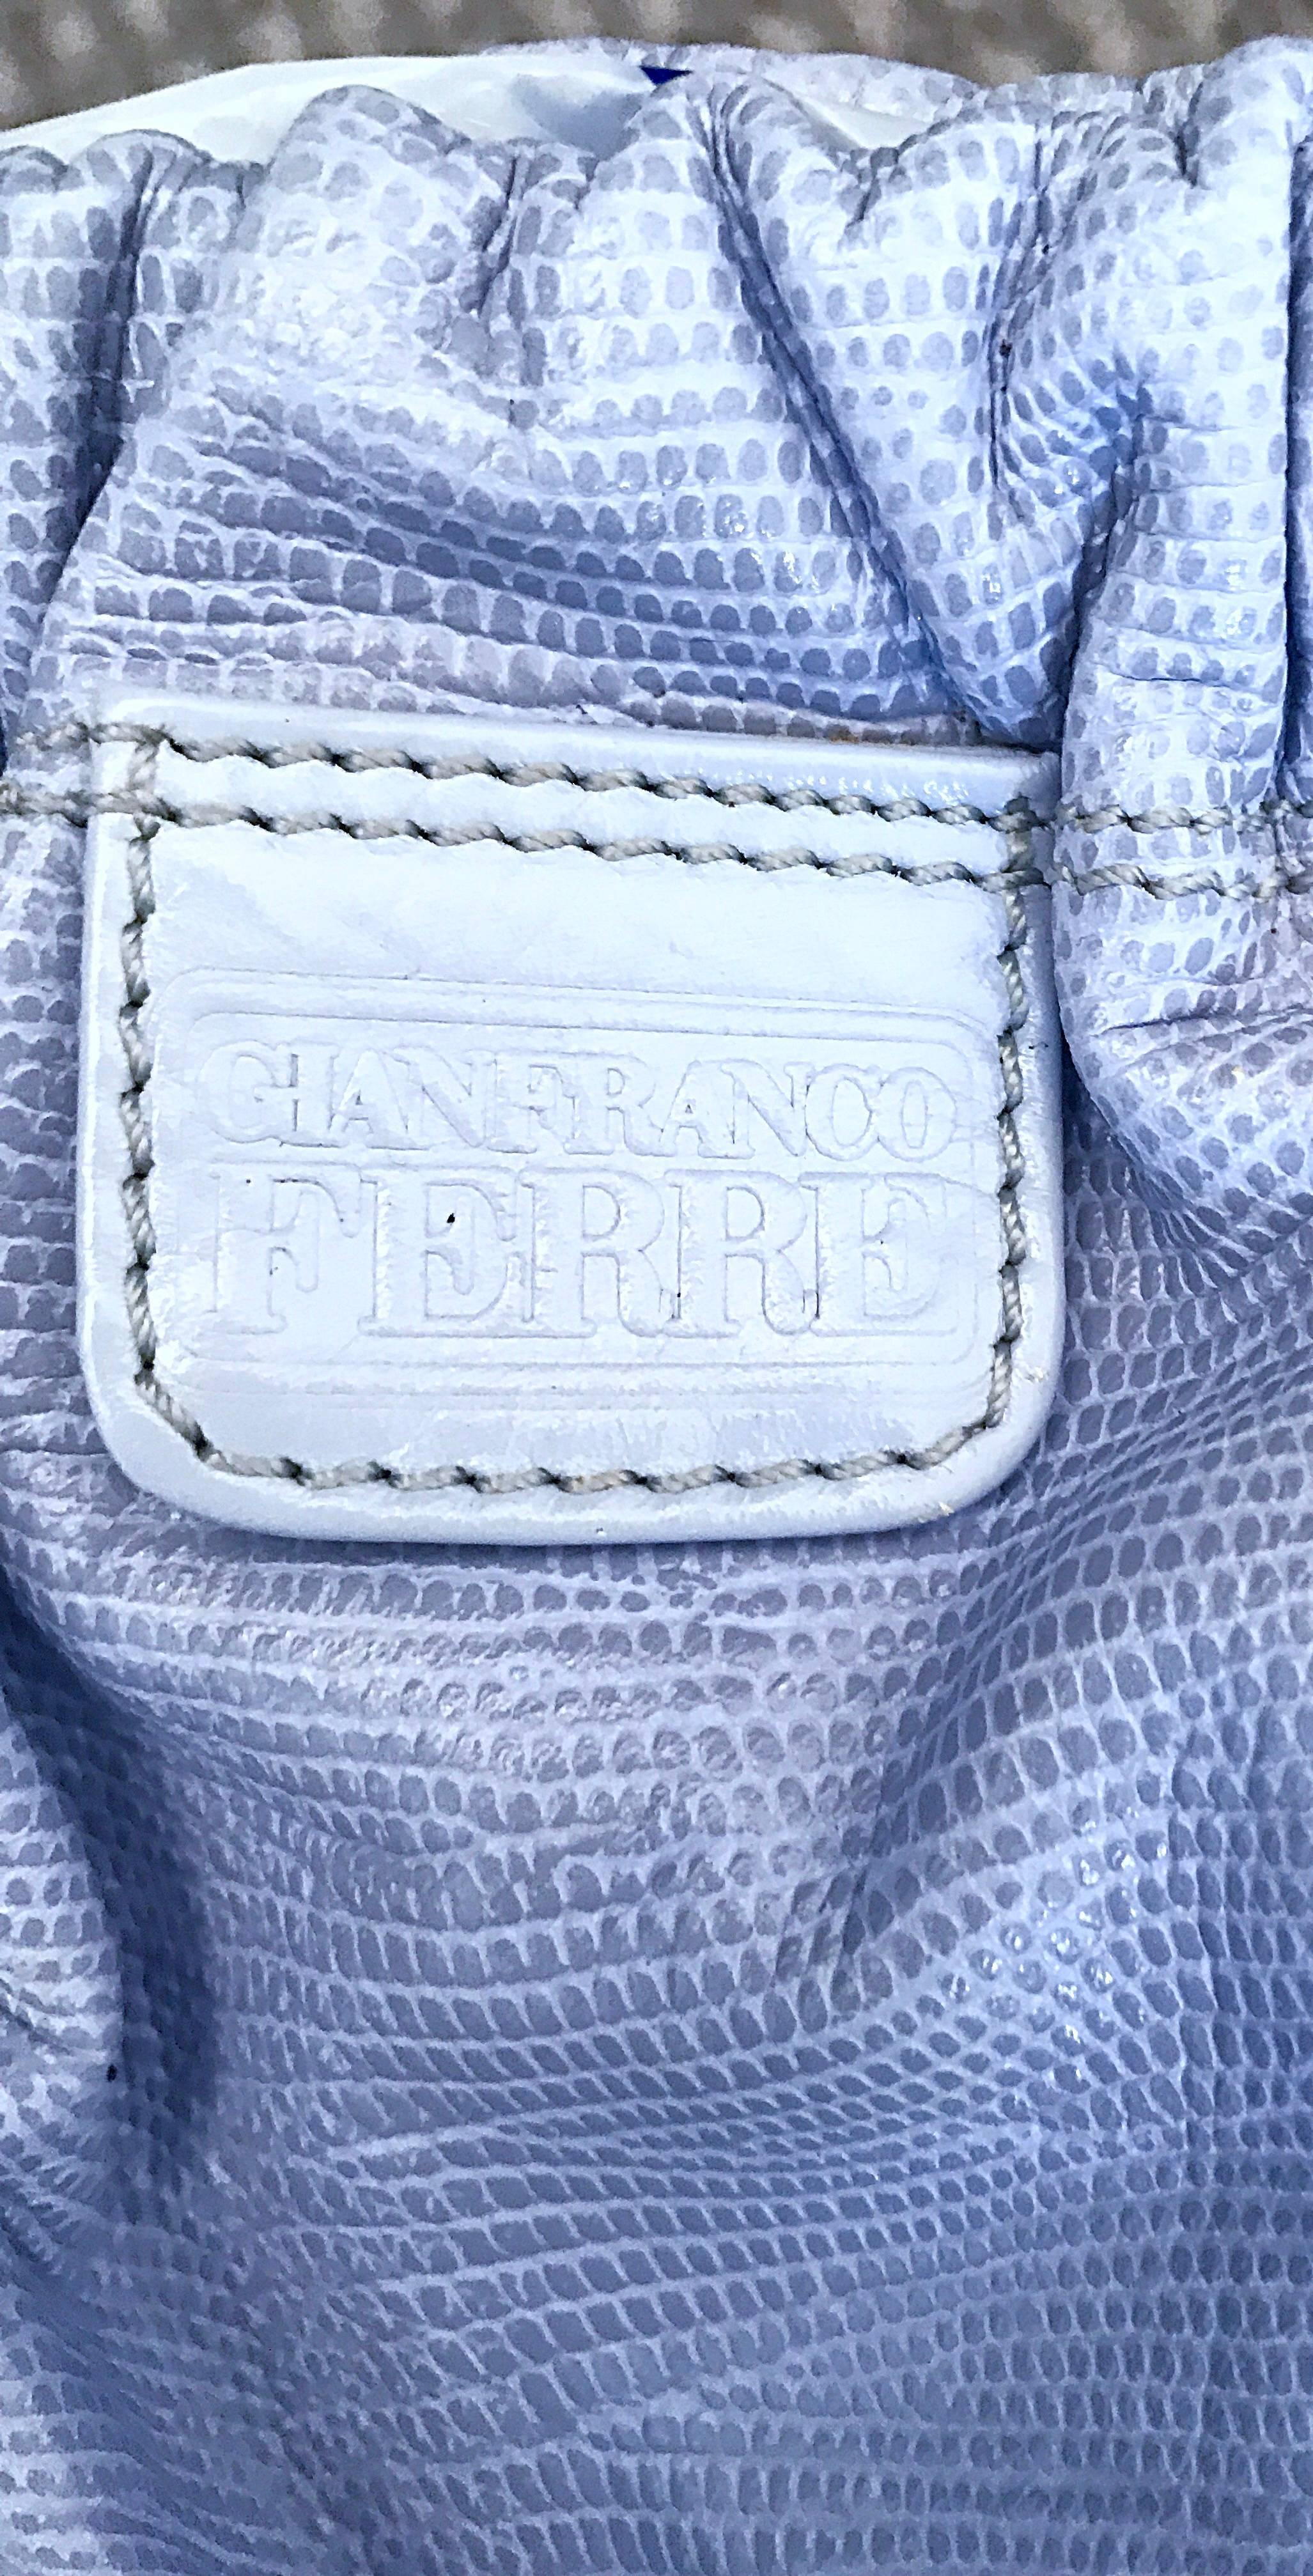 Vintage Gianfranco Ferre 1990s Lilac Lavender Purple Lizard Embossed Handbag 90s In Excellent Condition For Sale In San Diego, CA